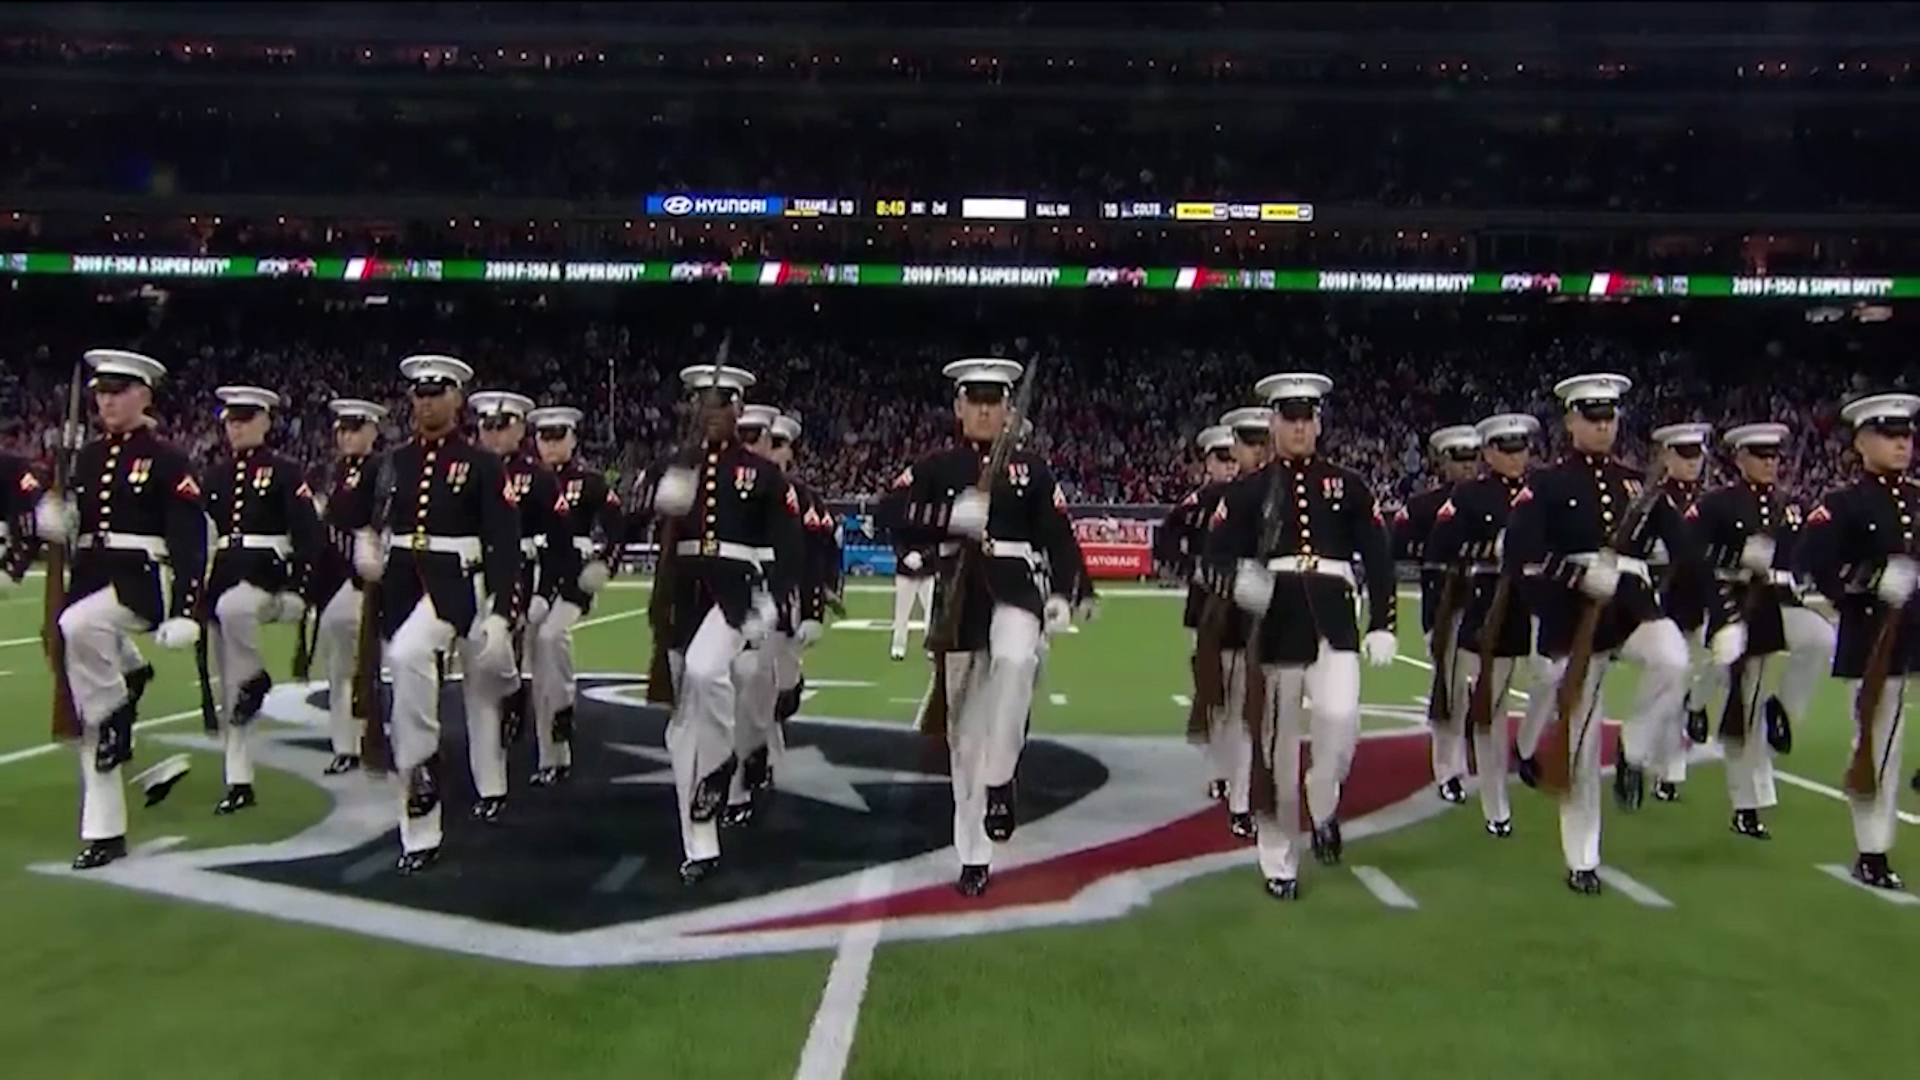 Military on an NFL pitch